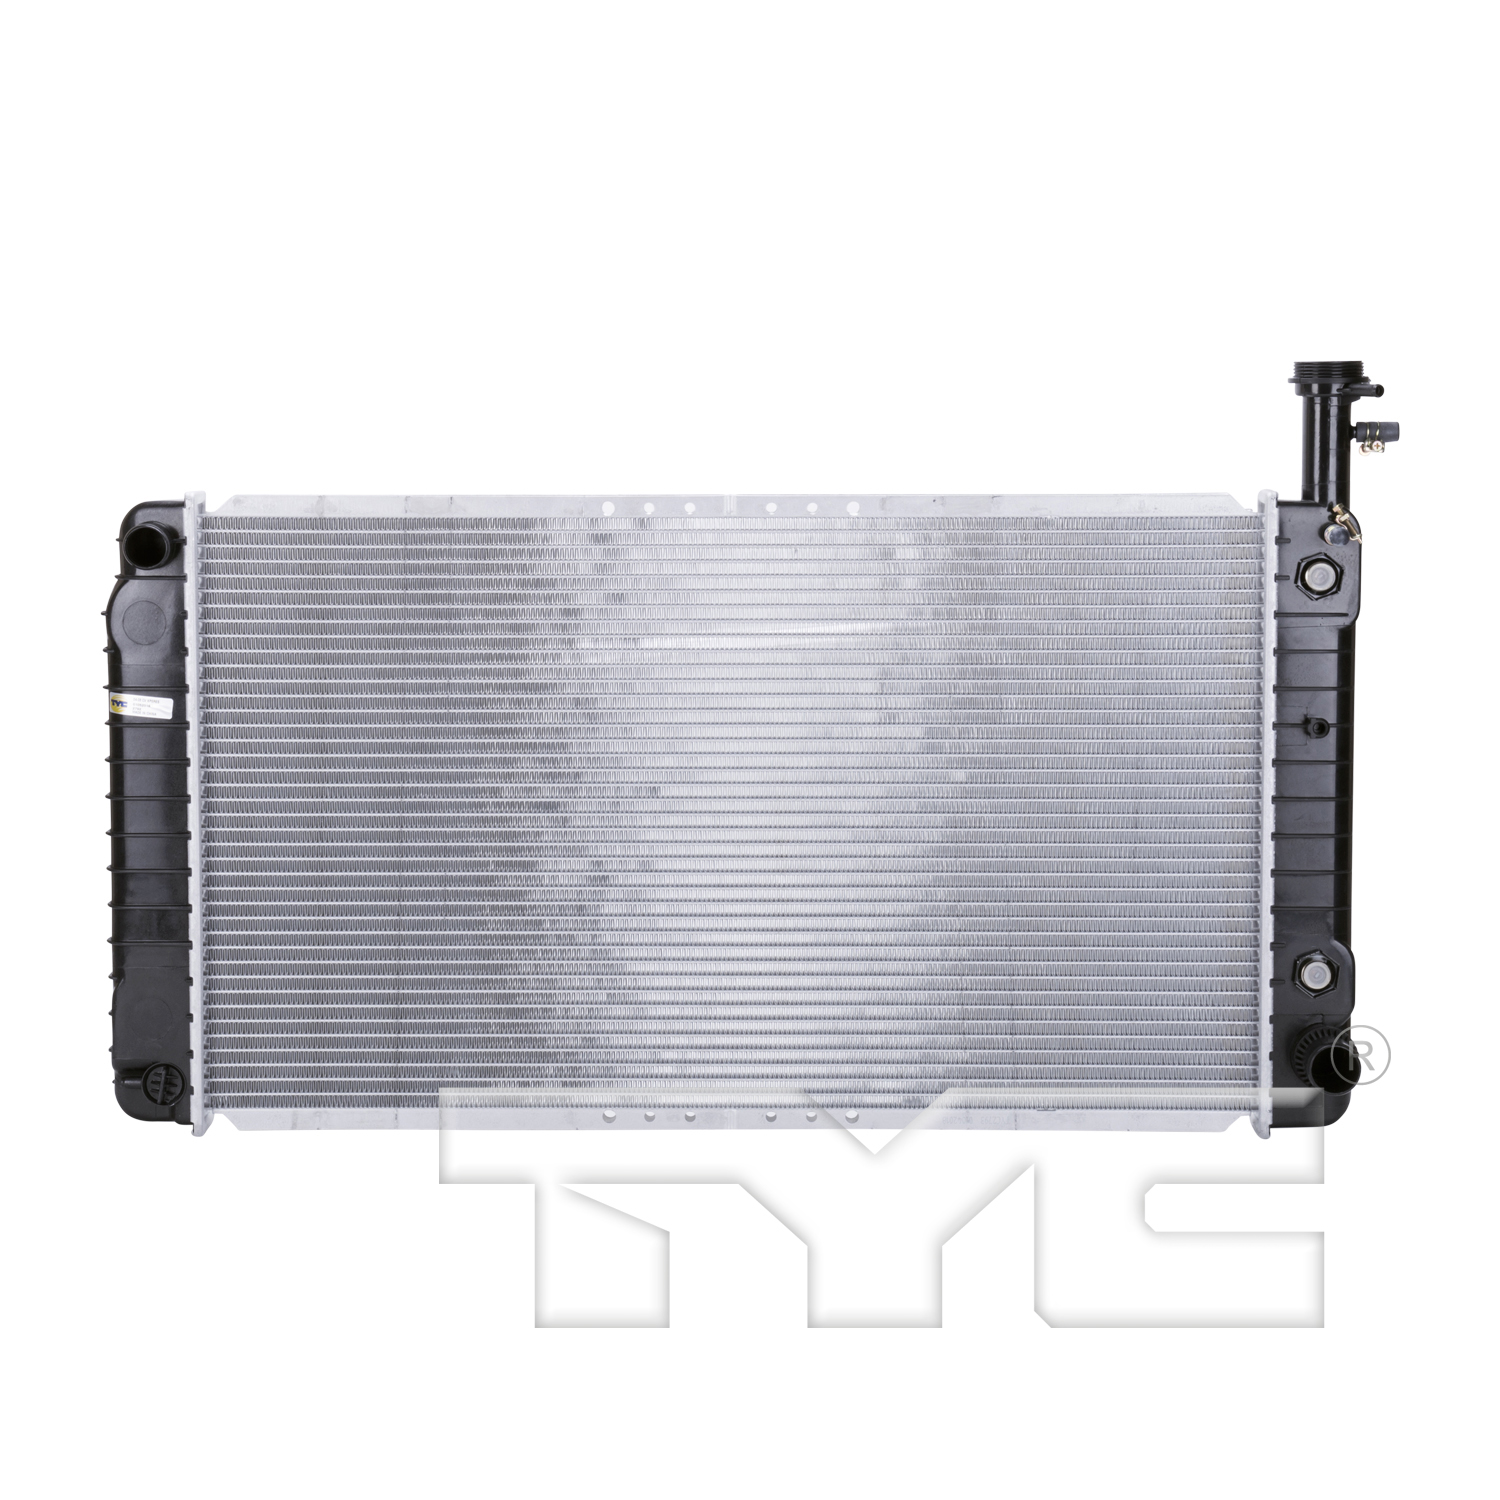 Aftermarket RADIATORS for CHEVROLET - EXPRESS 2500, EXPRESS 2500,04-14,Radiator assembly